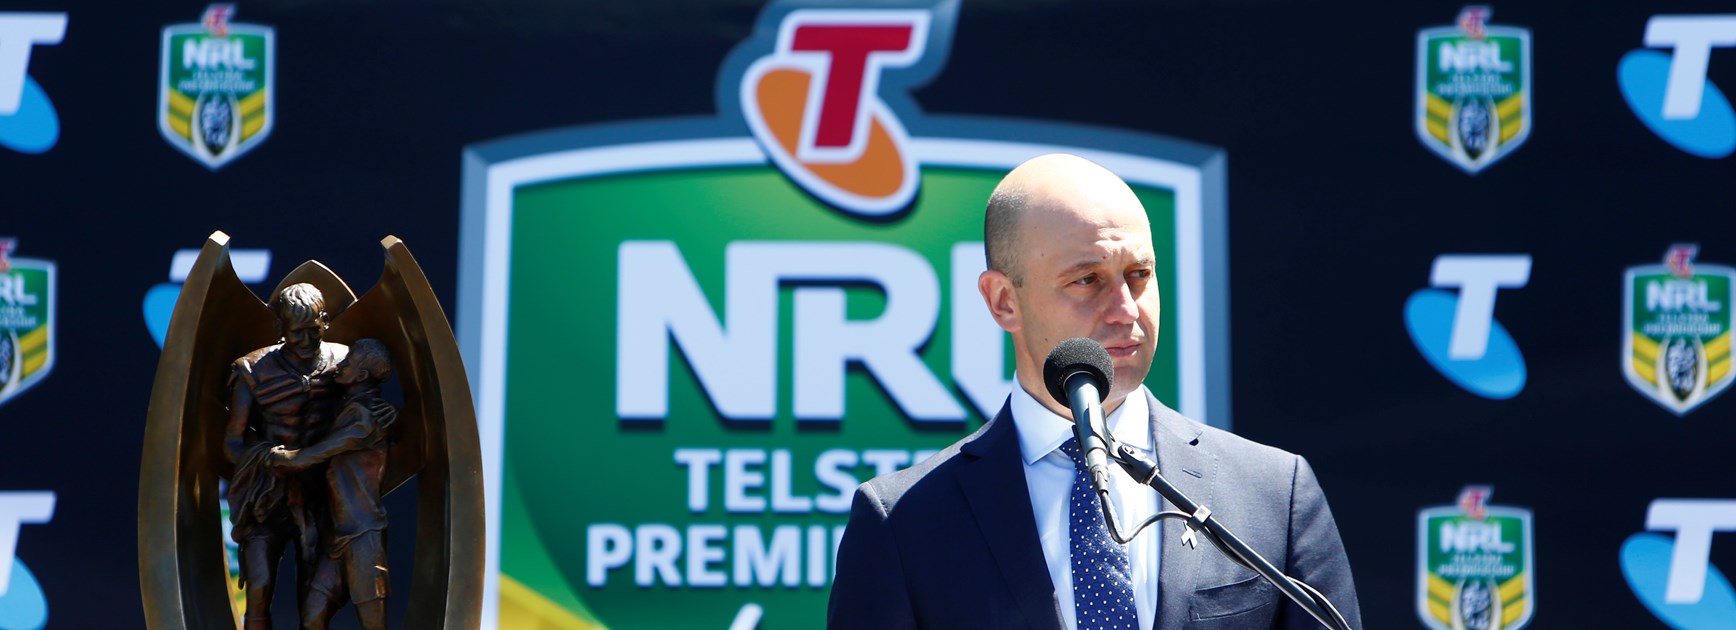 Third-party overhaul high on agenda at NRL CEOs conference